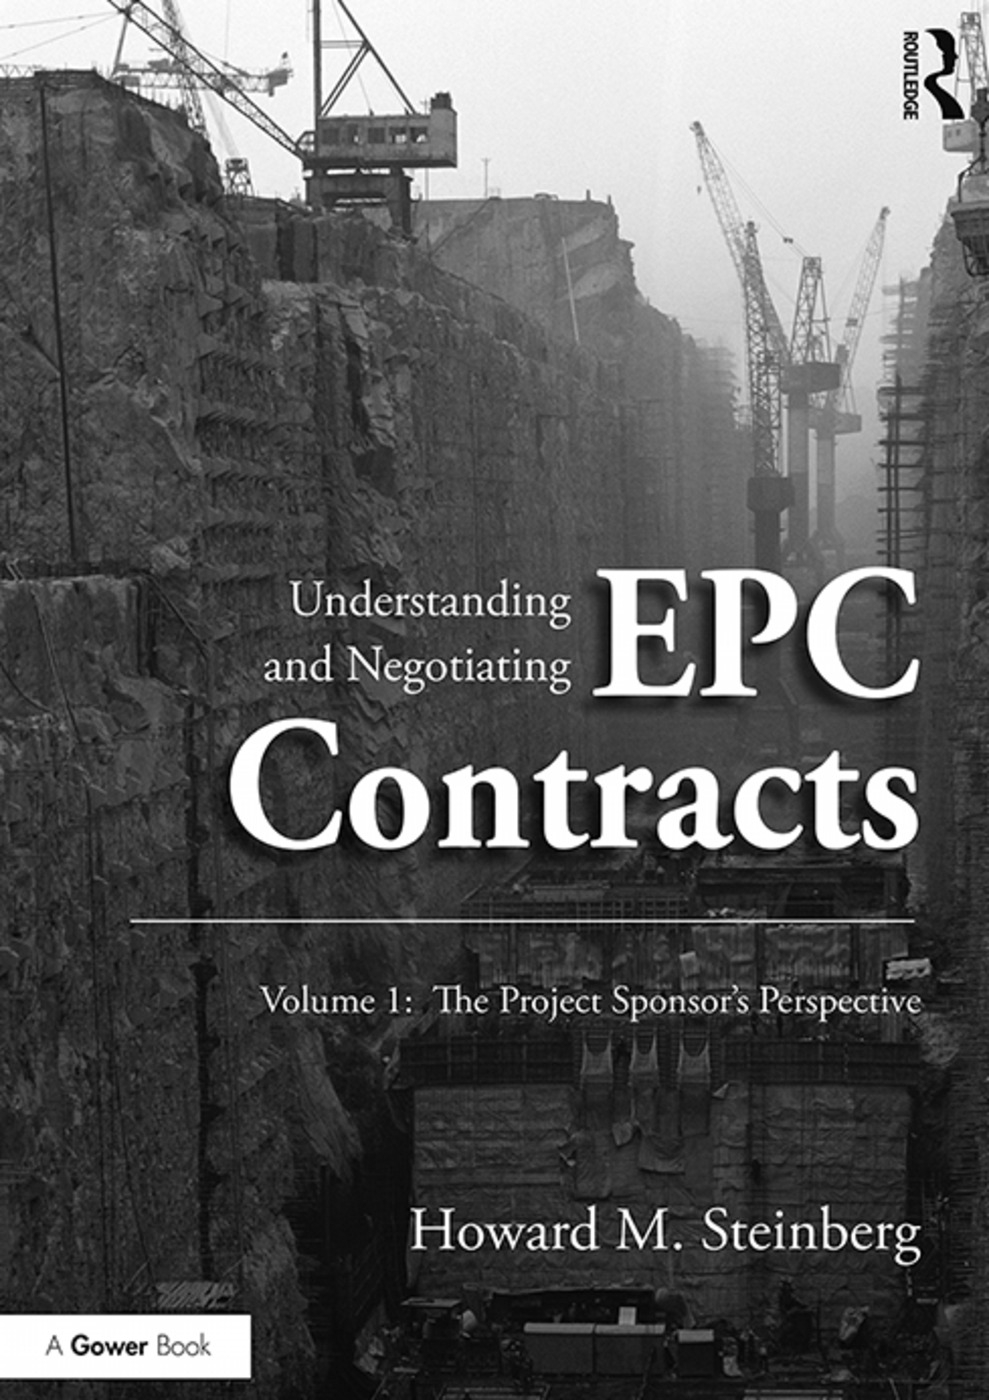 Understanding and Negotiating Epc Contracts, Volume 1: The Project Sponsor’s Perspective